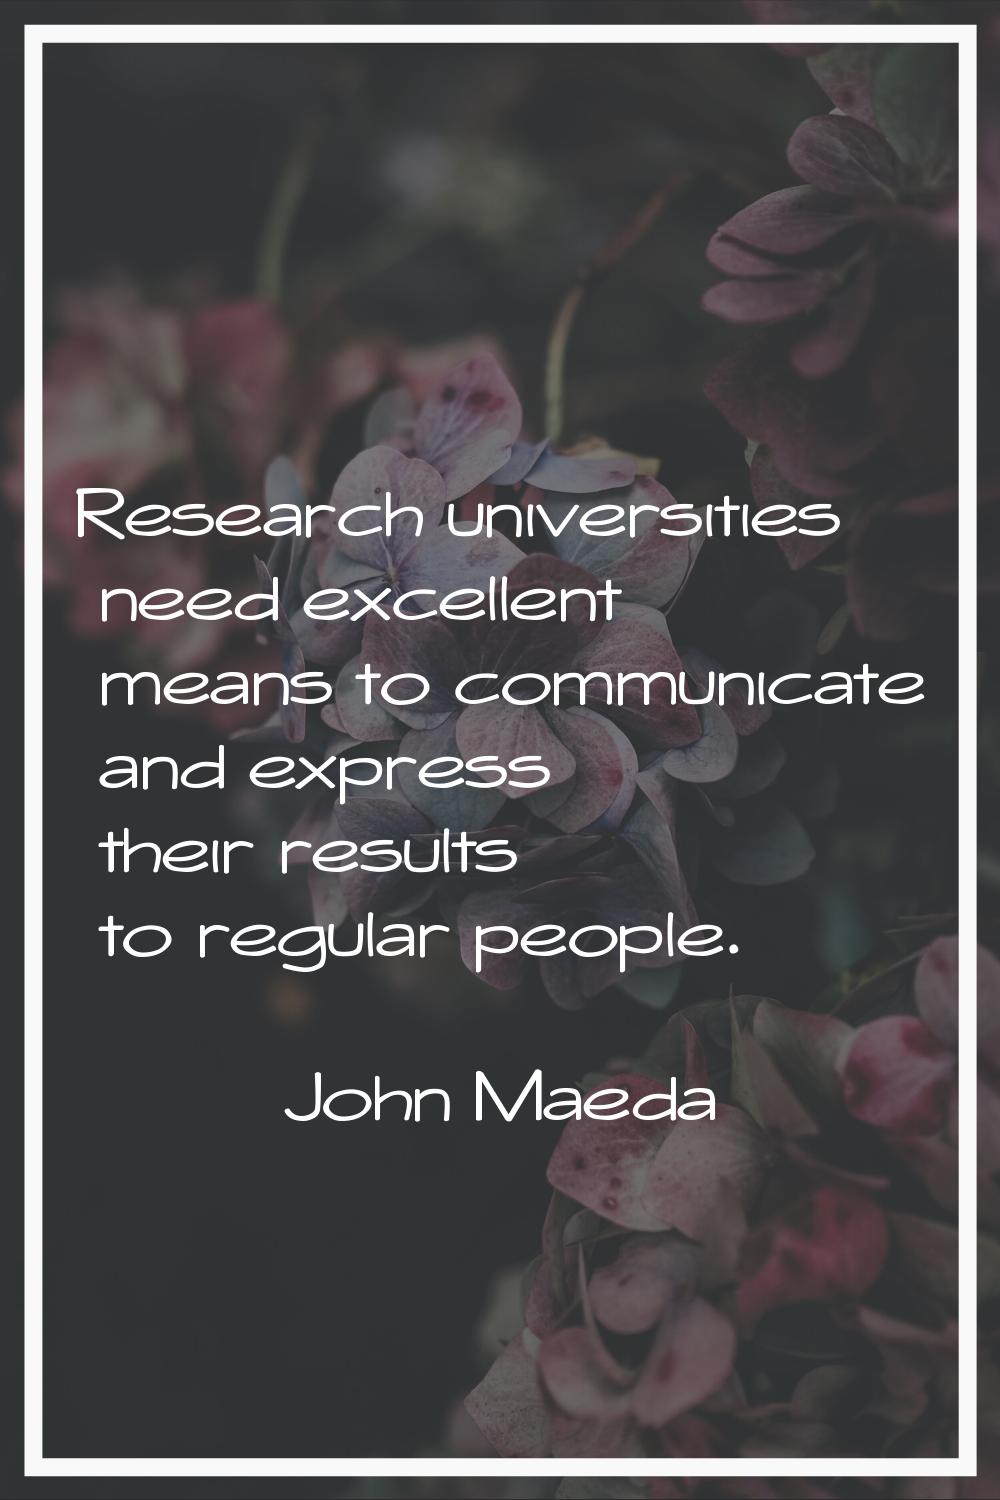 Research universities need excellent means to communicate and express their results to regular peop